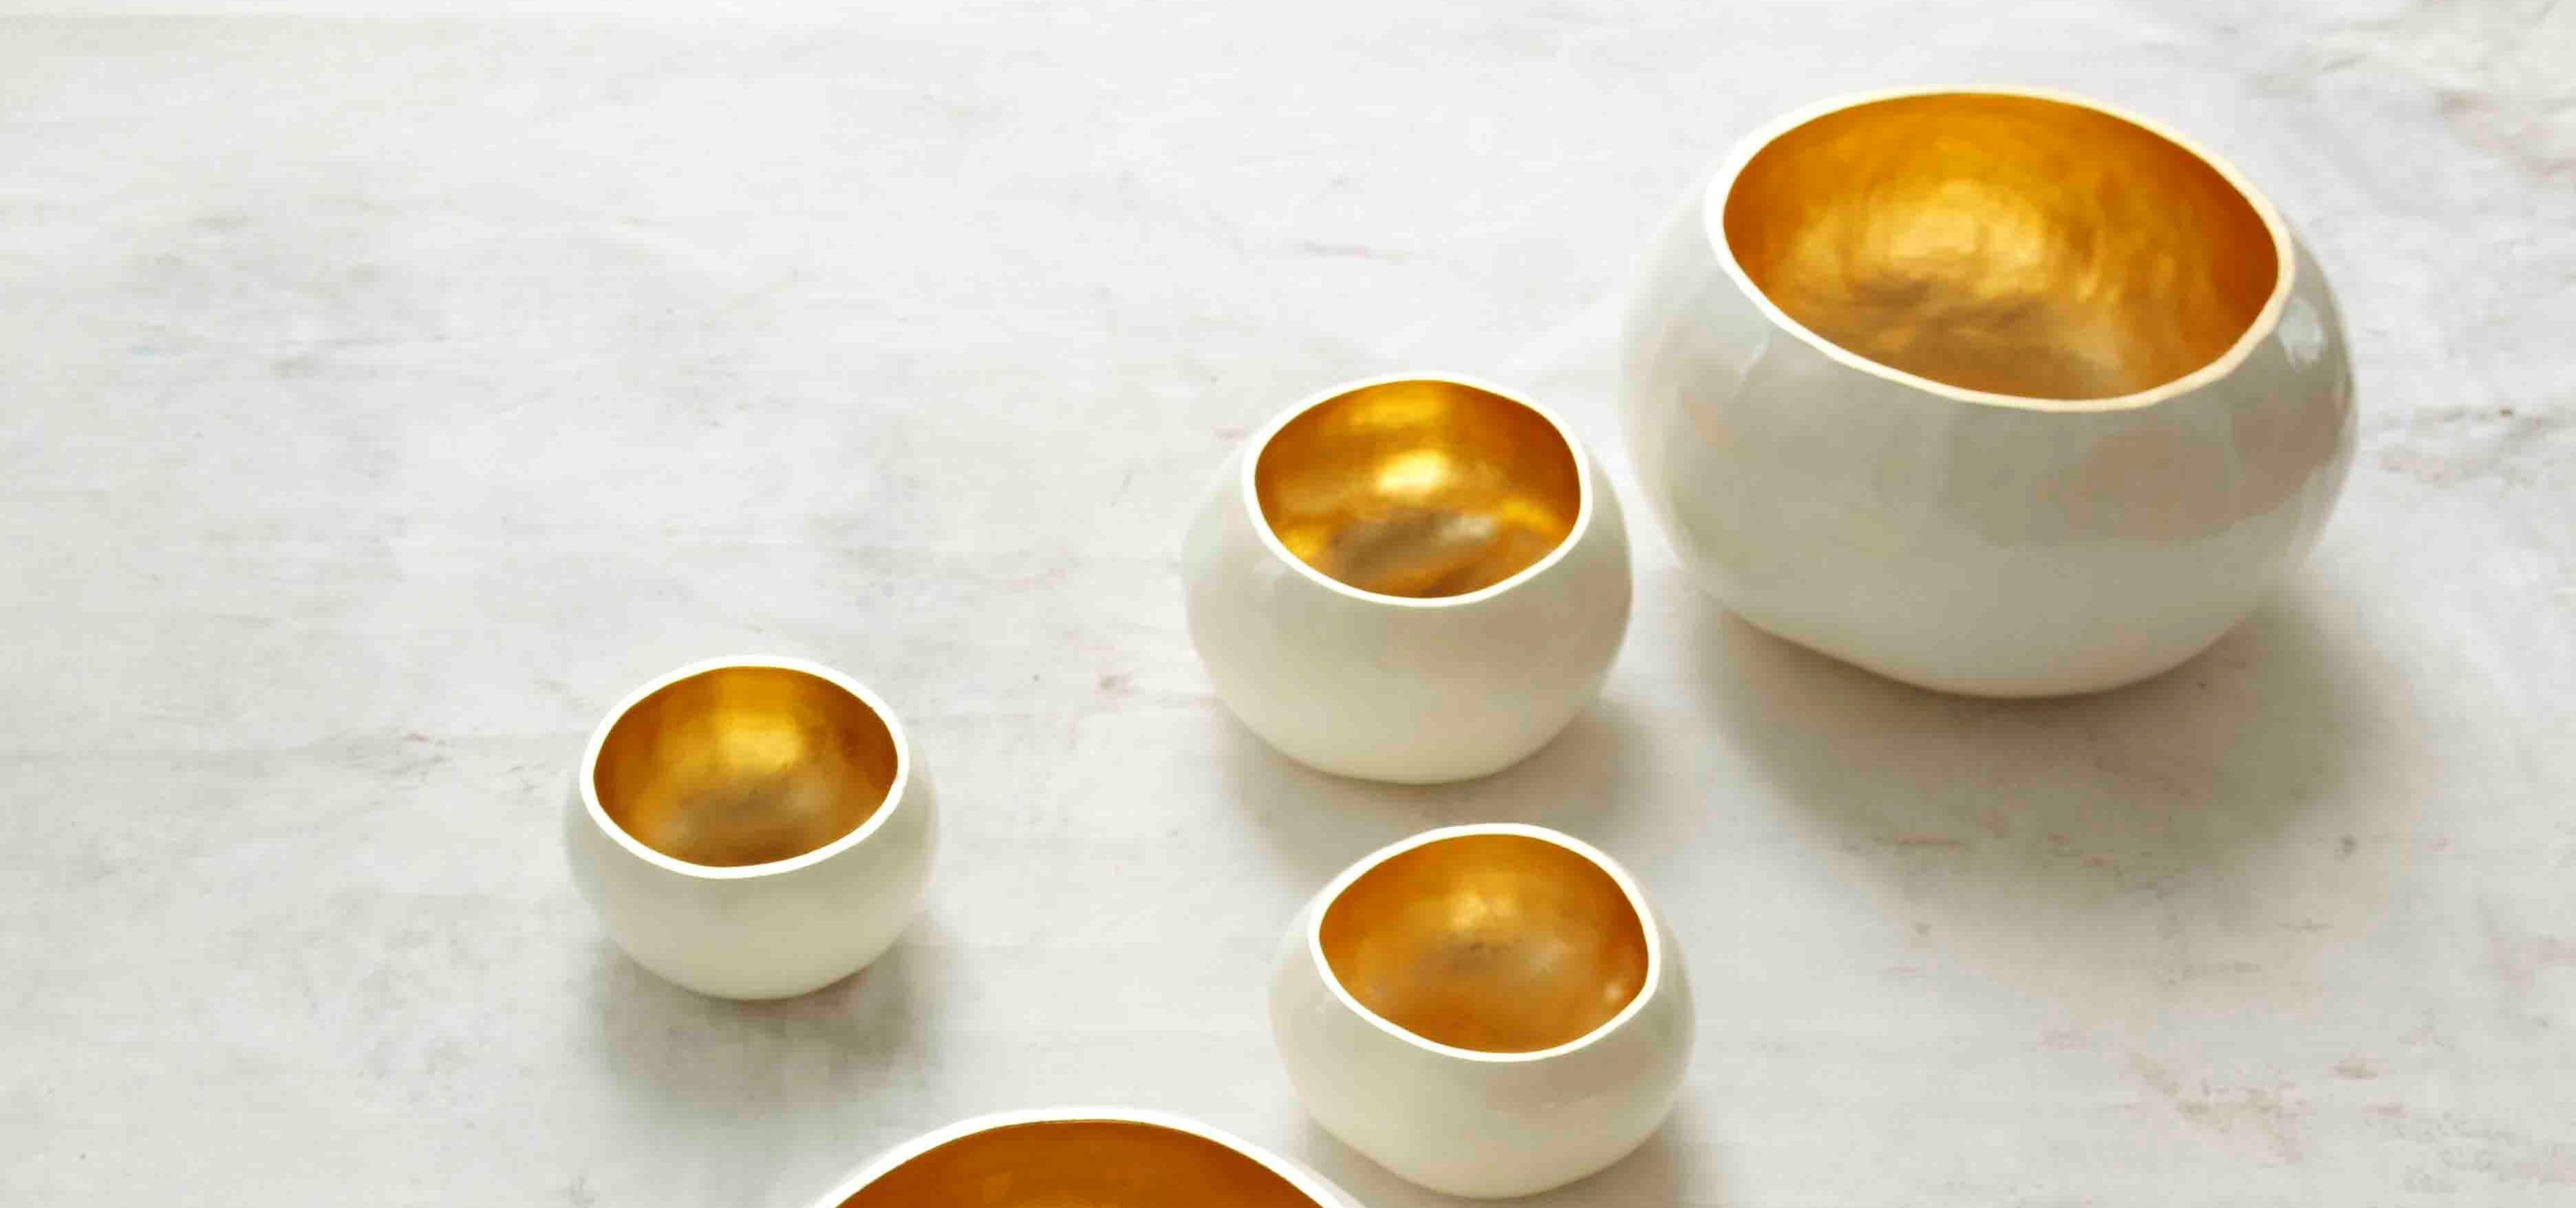 Set of 4 Mathias bowls by Onora
Dimensions:
 D 22 -25 cm
 D 18 - 21 cm
 D 16 - 17 cm
Materials: Lacquered wood, Gold Leaf
Also sold separately. Please contact us.

These gourds are grown, dried, carved, cleaned, and then covered with several